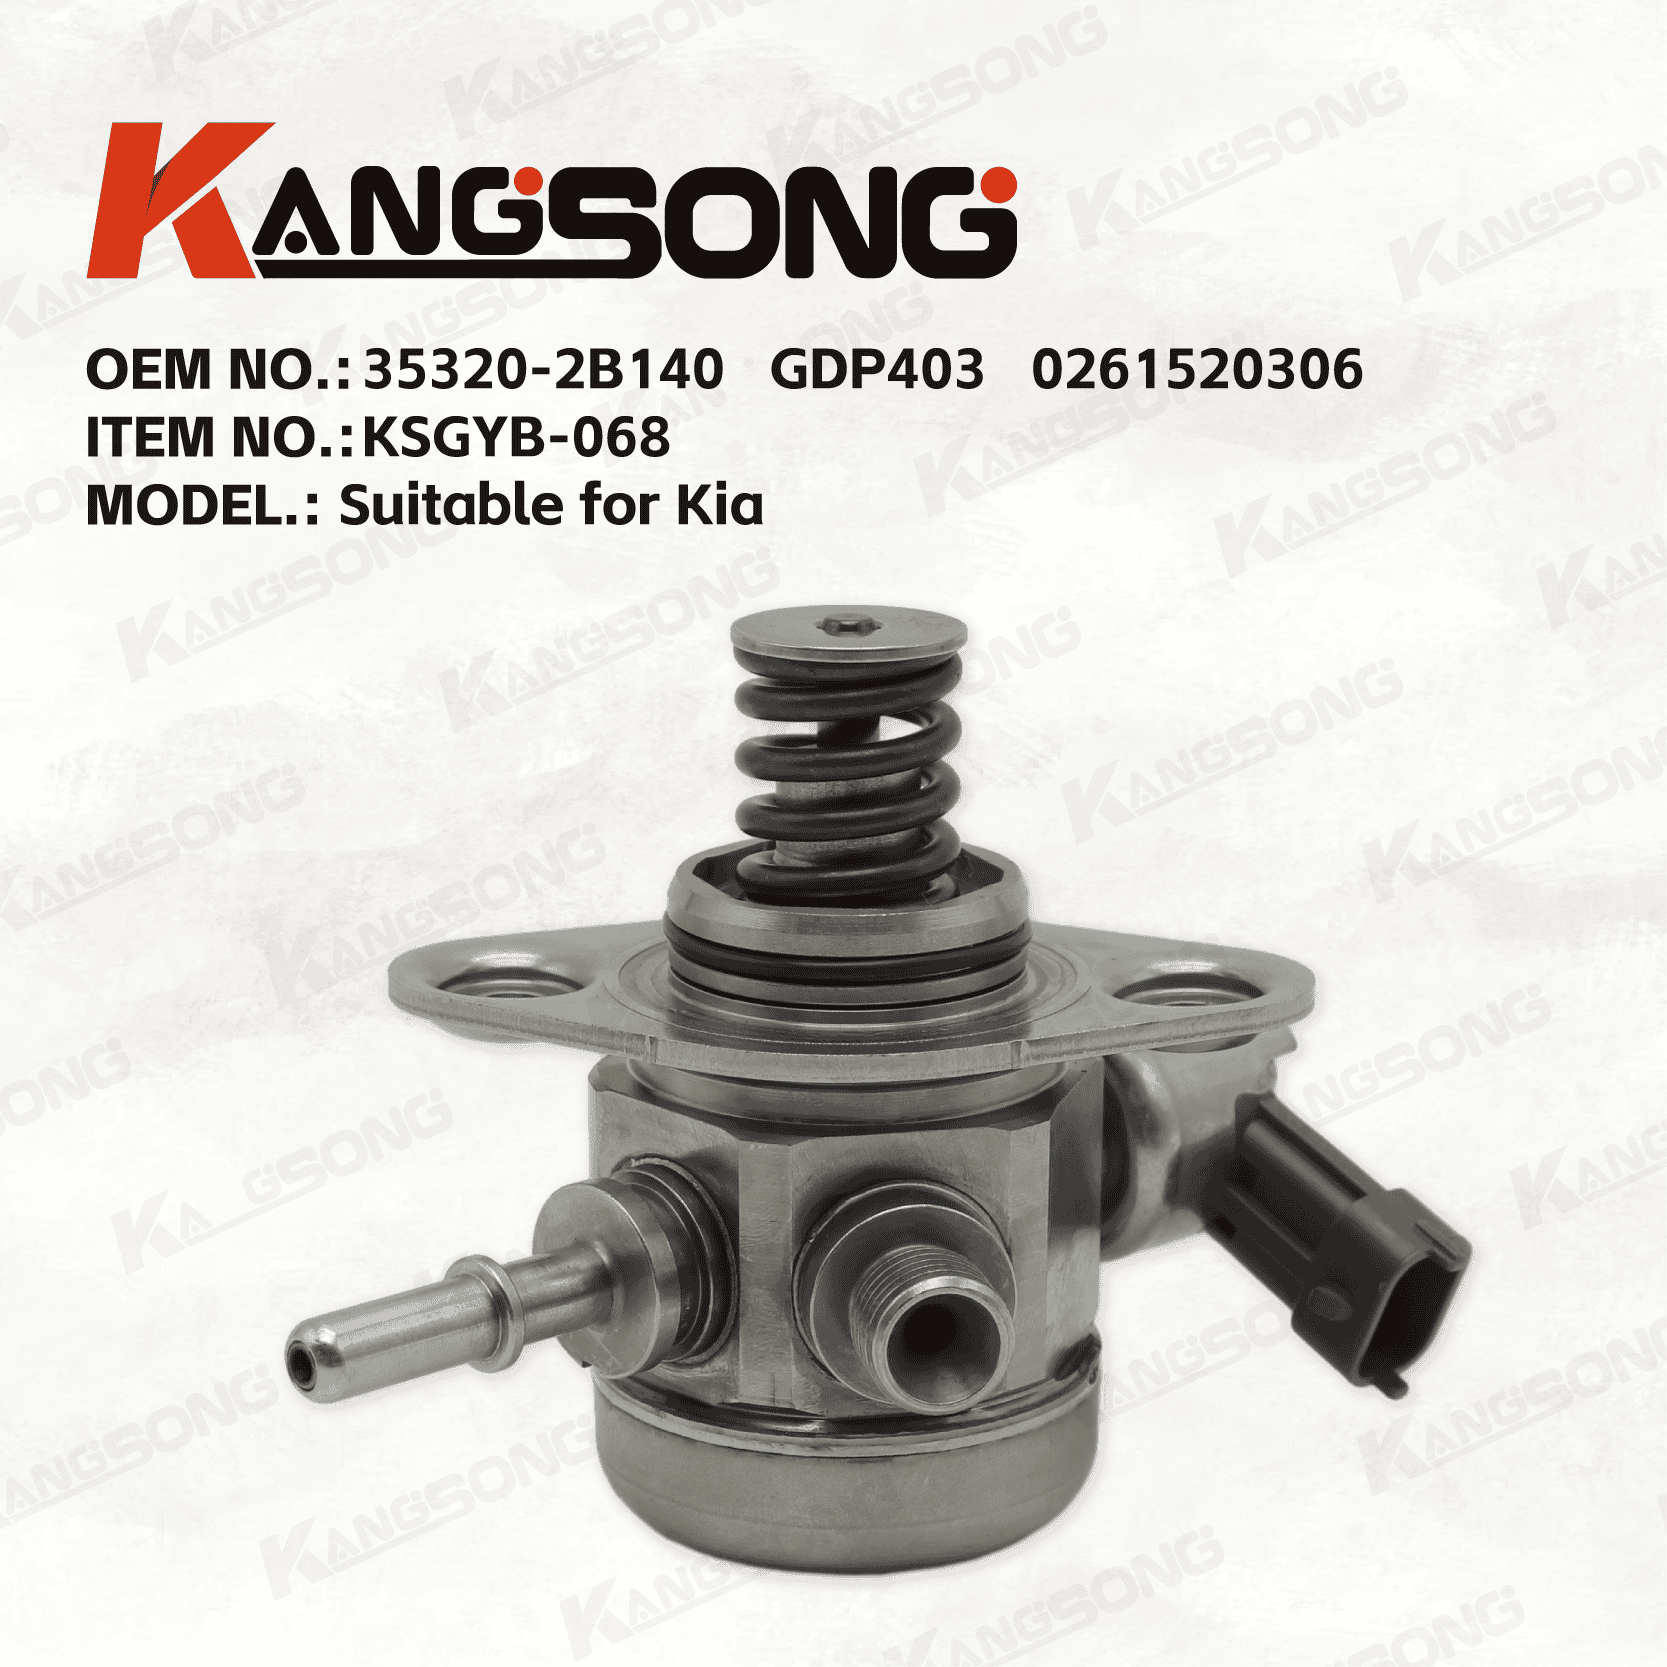 Applicable to a series of 1.6T engines such as Kia/35320-2B140 GDP403 0261520306/High pressure fuel pump/KSGYB-068